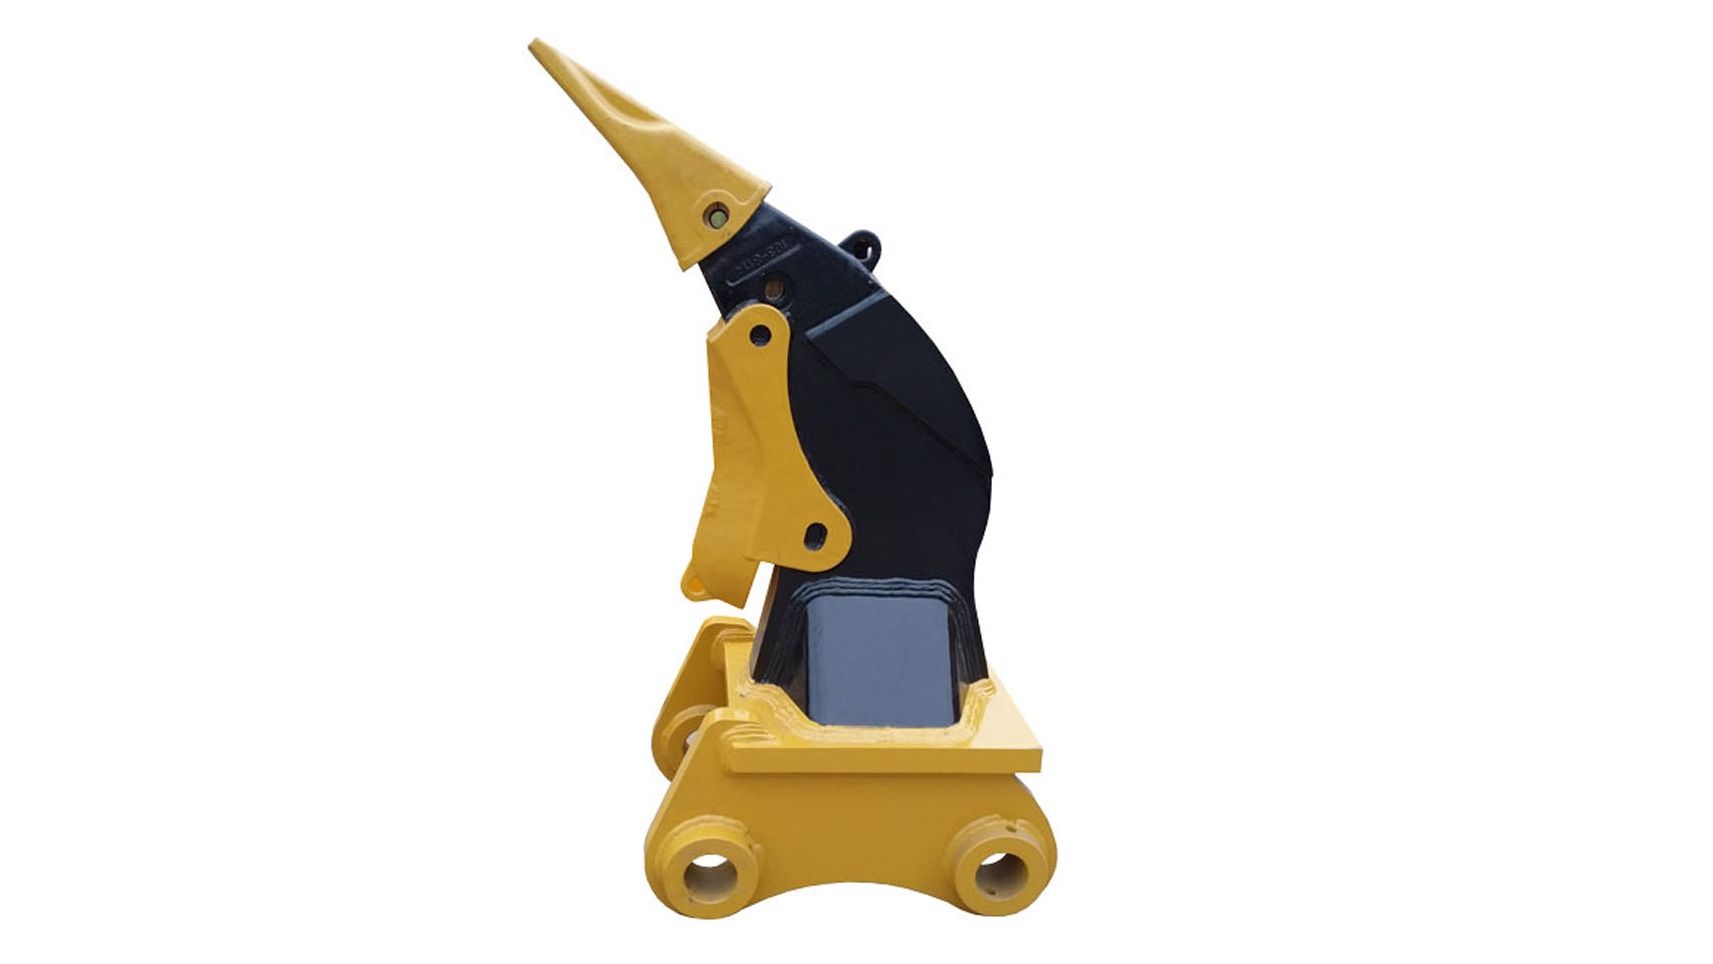 Under what circumstances are stump ripper for excavator generally used